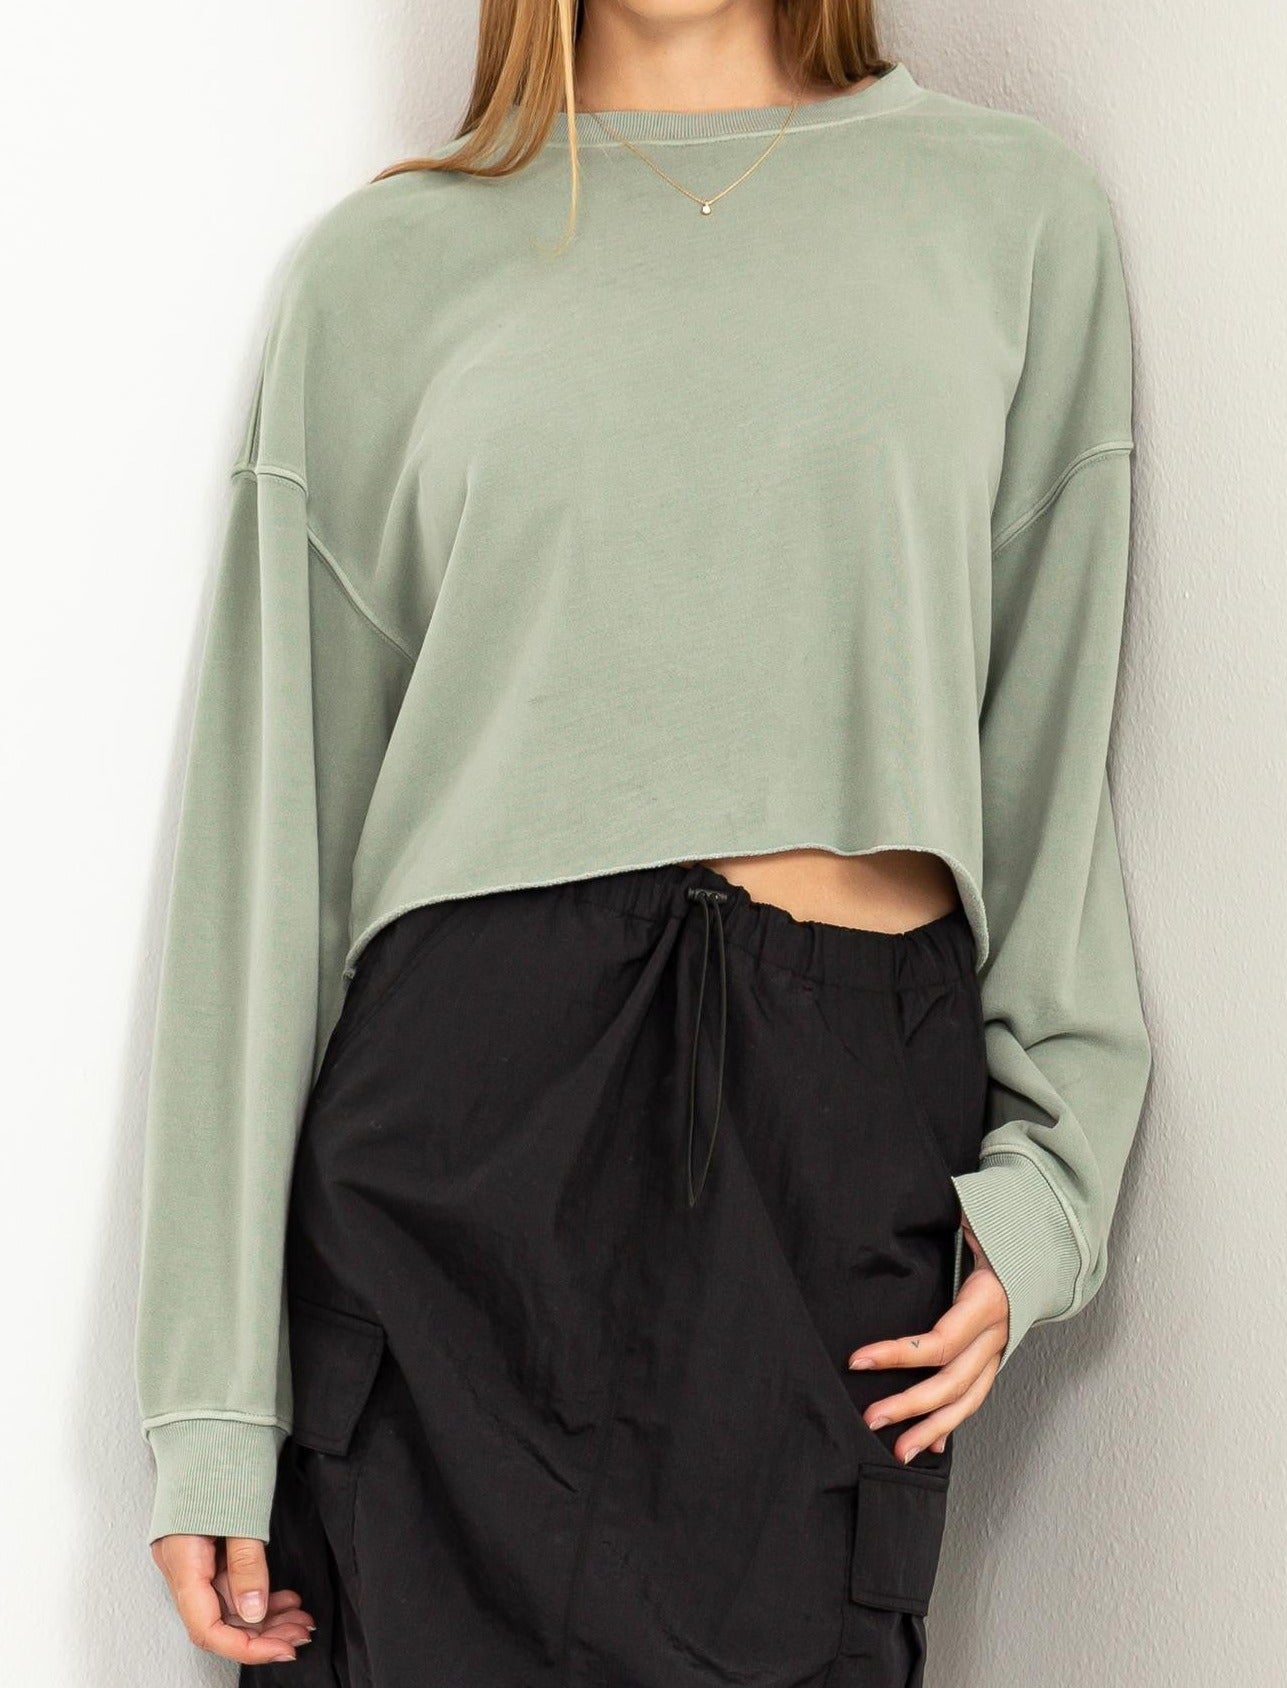 The Alexandra Cropped Sweater